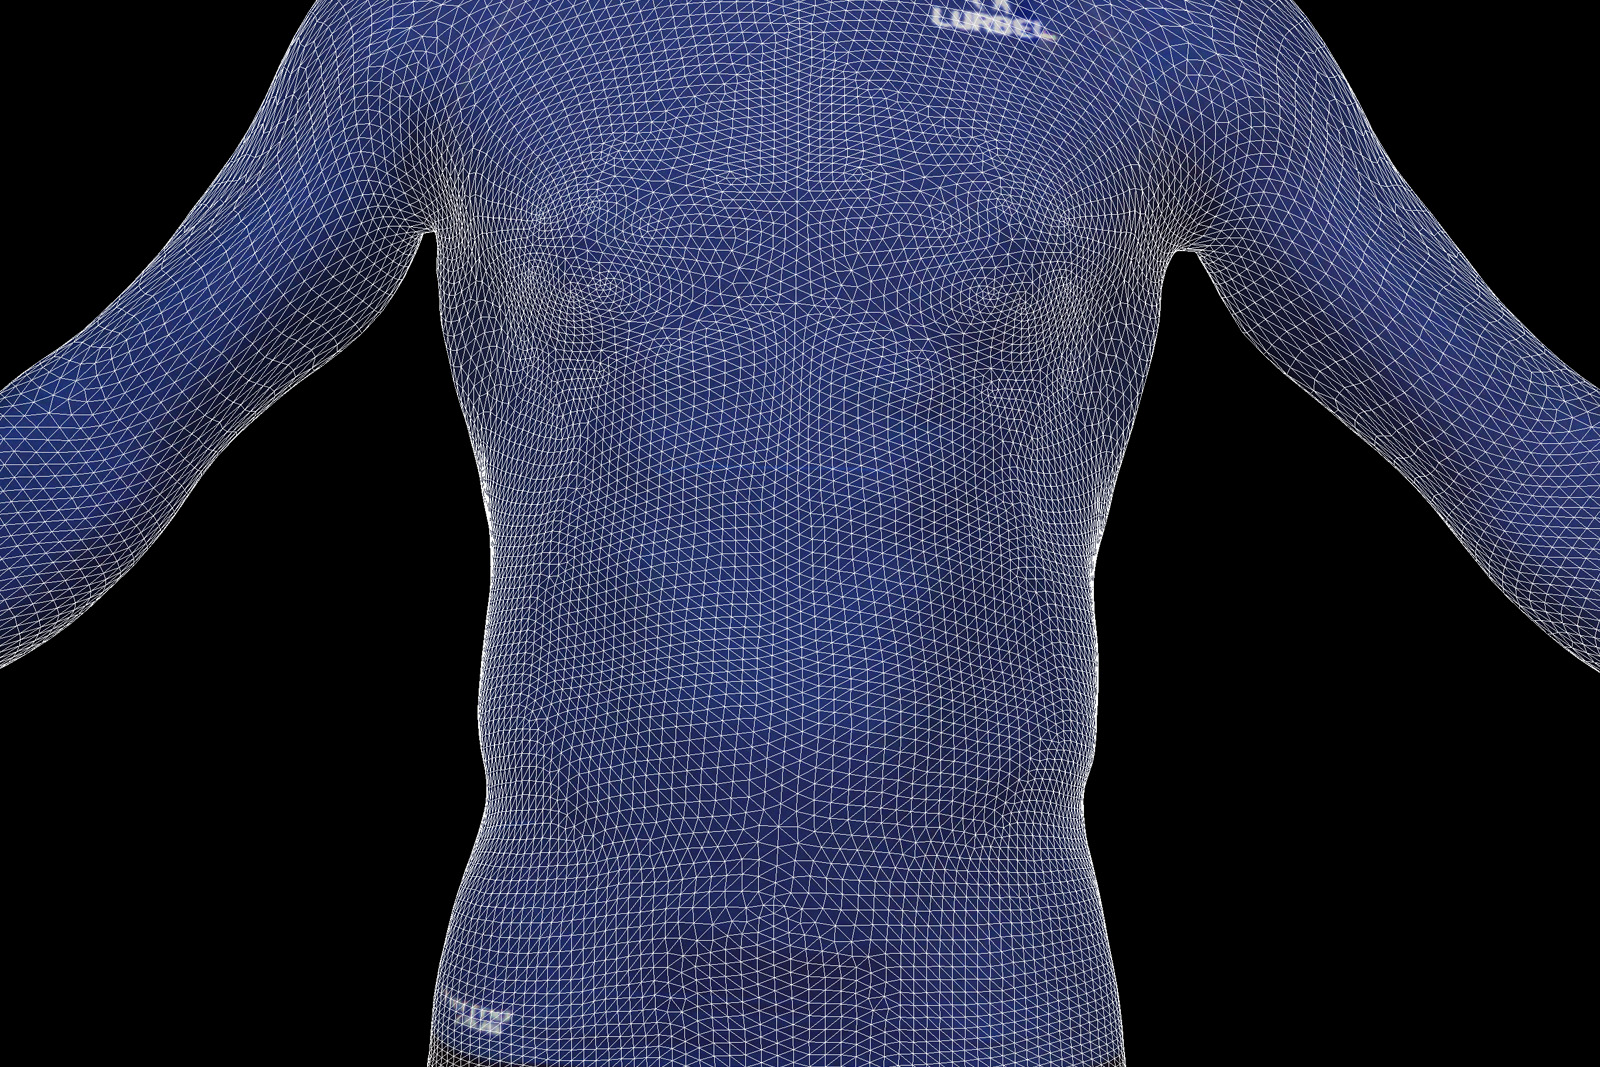 Knitted mesh in man figure